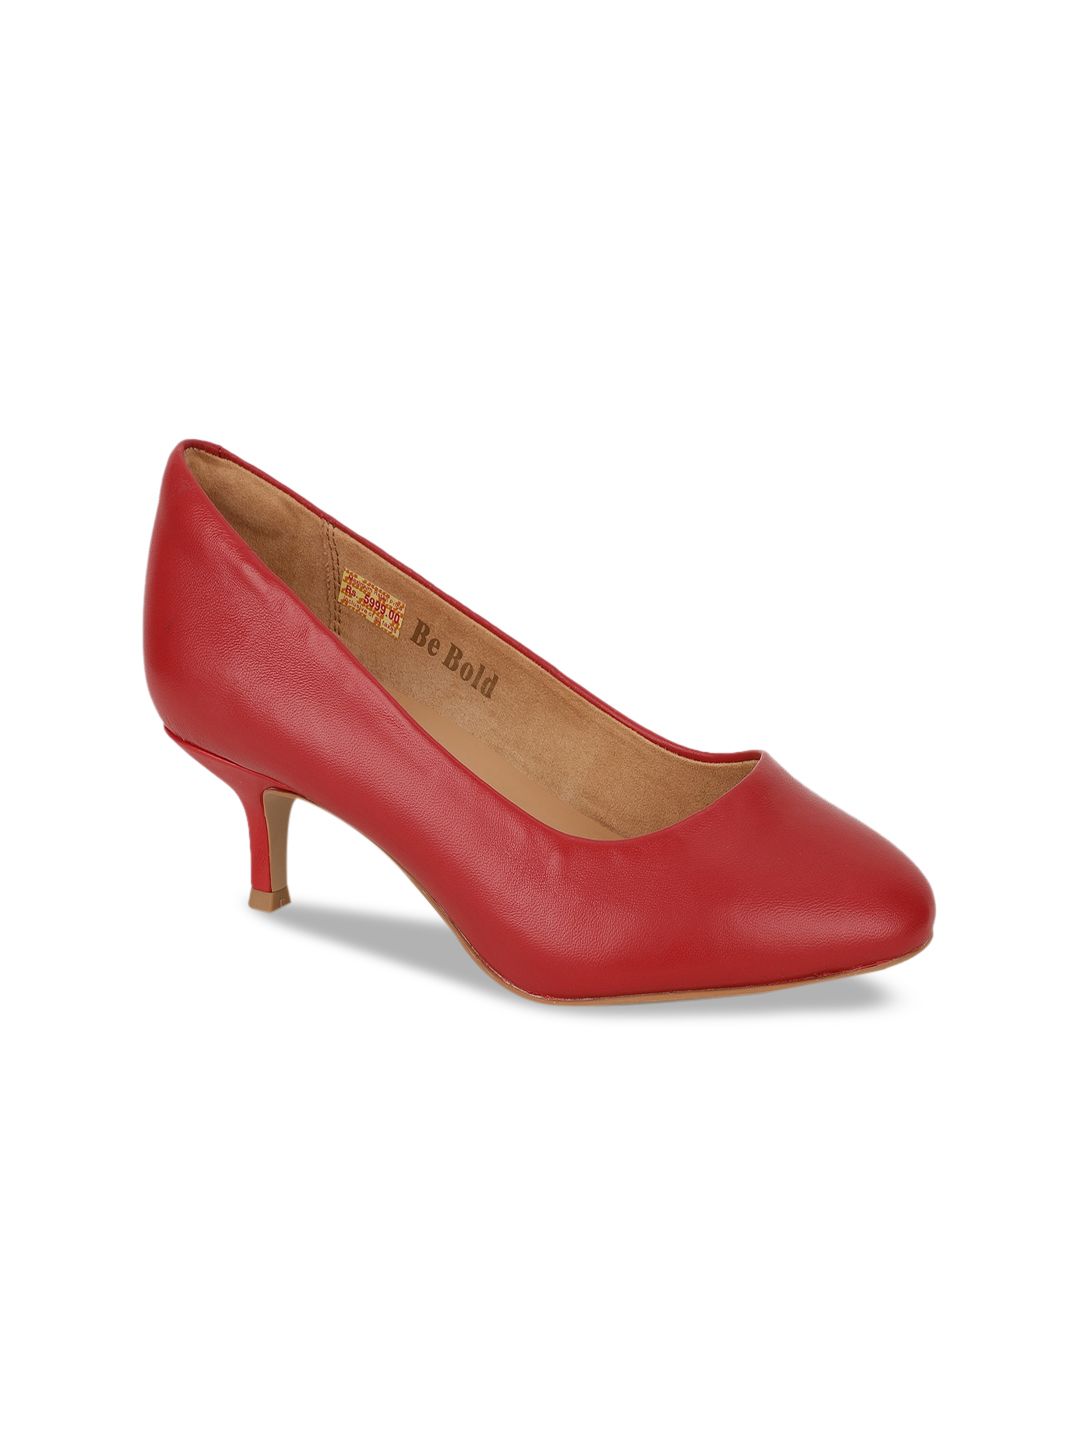 Hush Puppies Women Red Leather Party Kitten Pumps Price in India